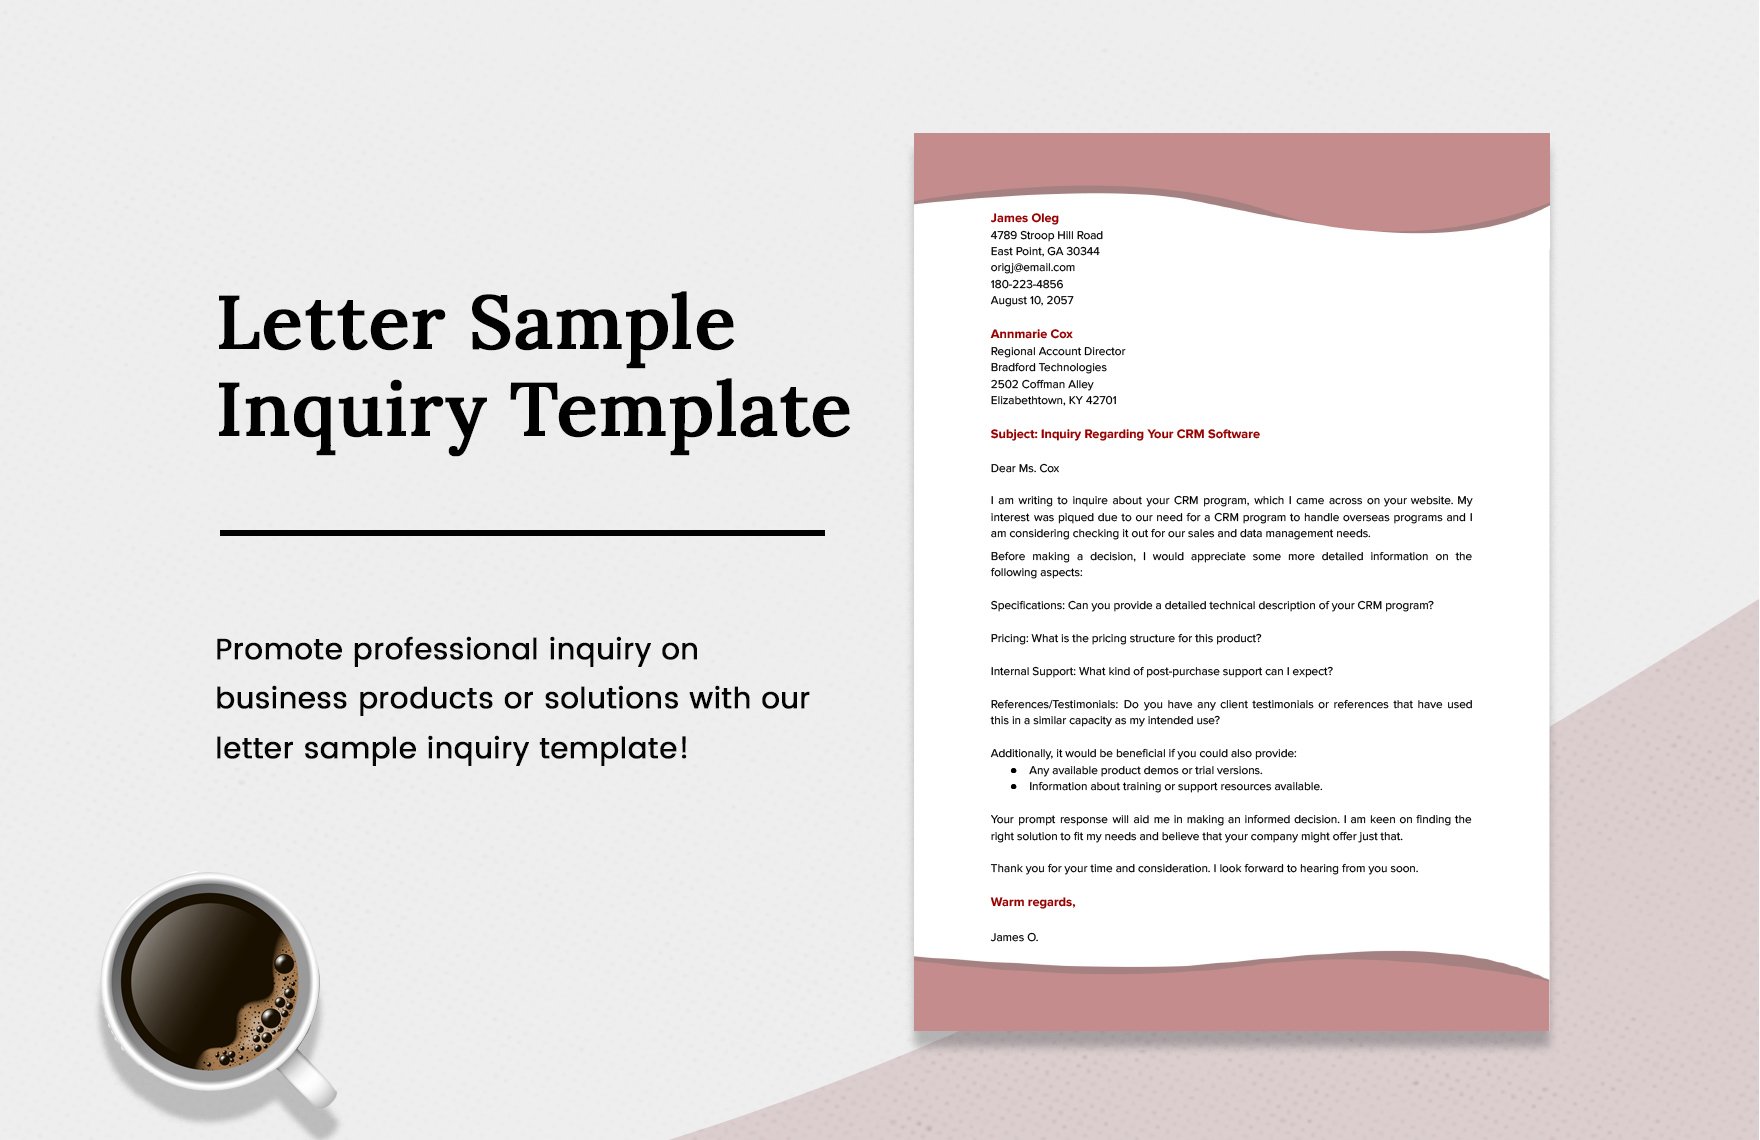 Letter Sample Inquiry Template